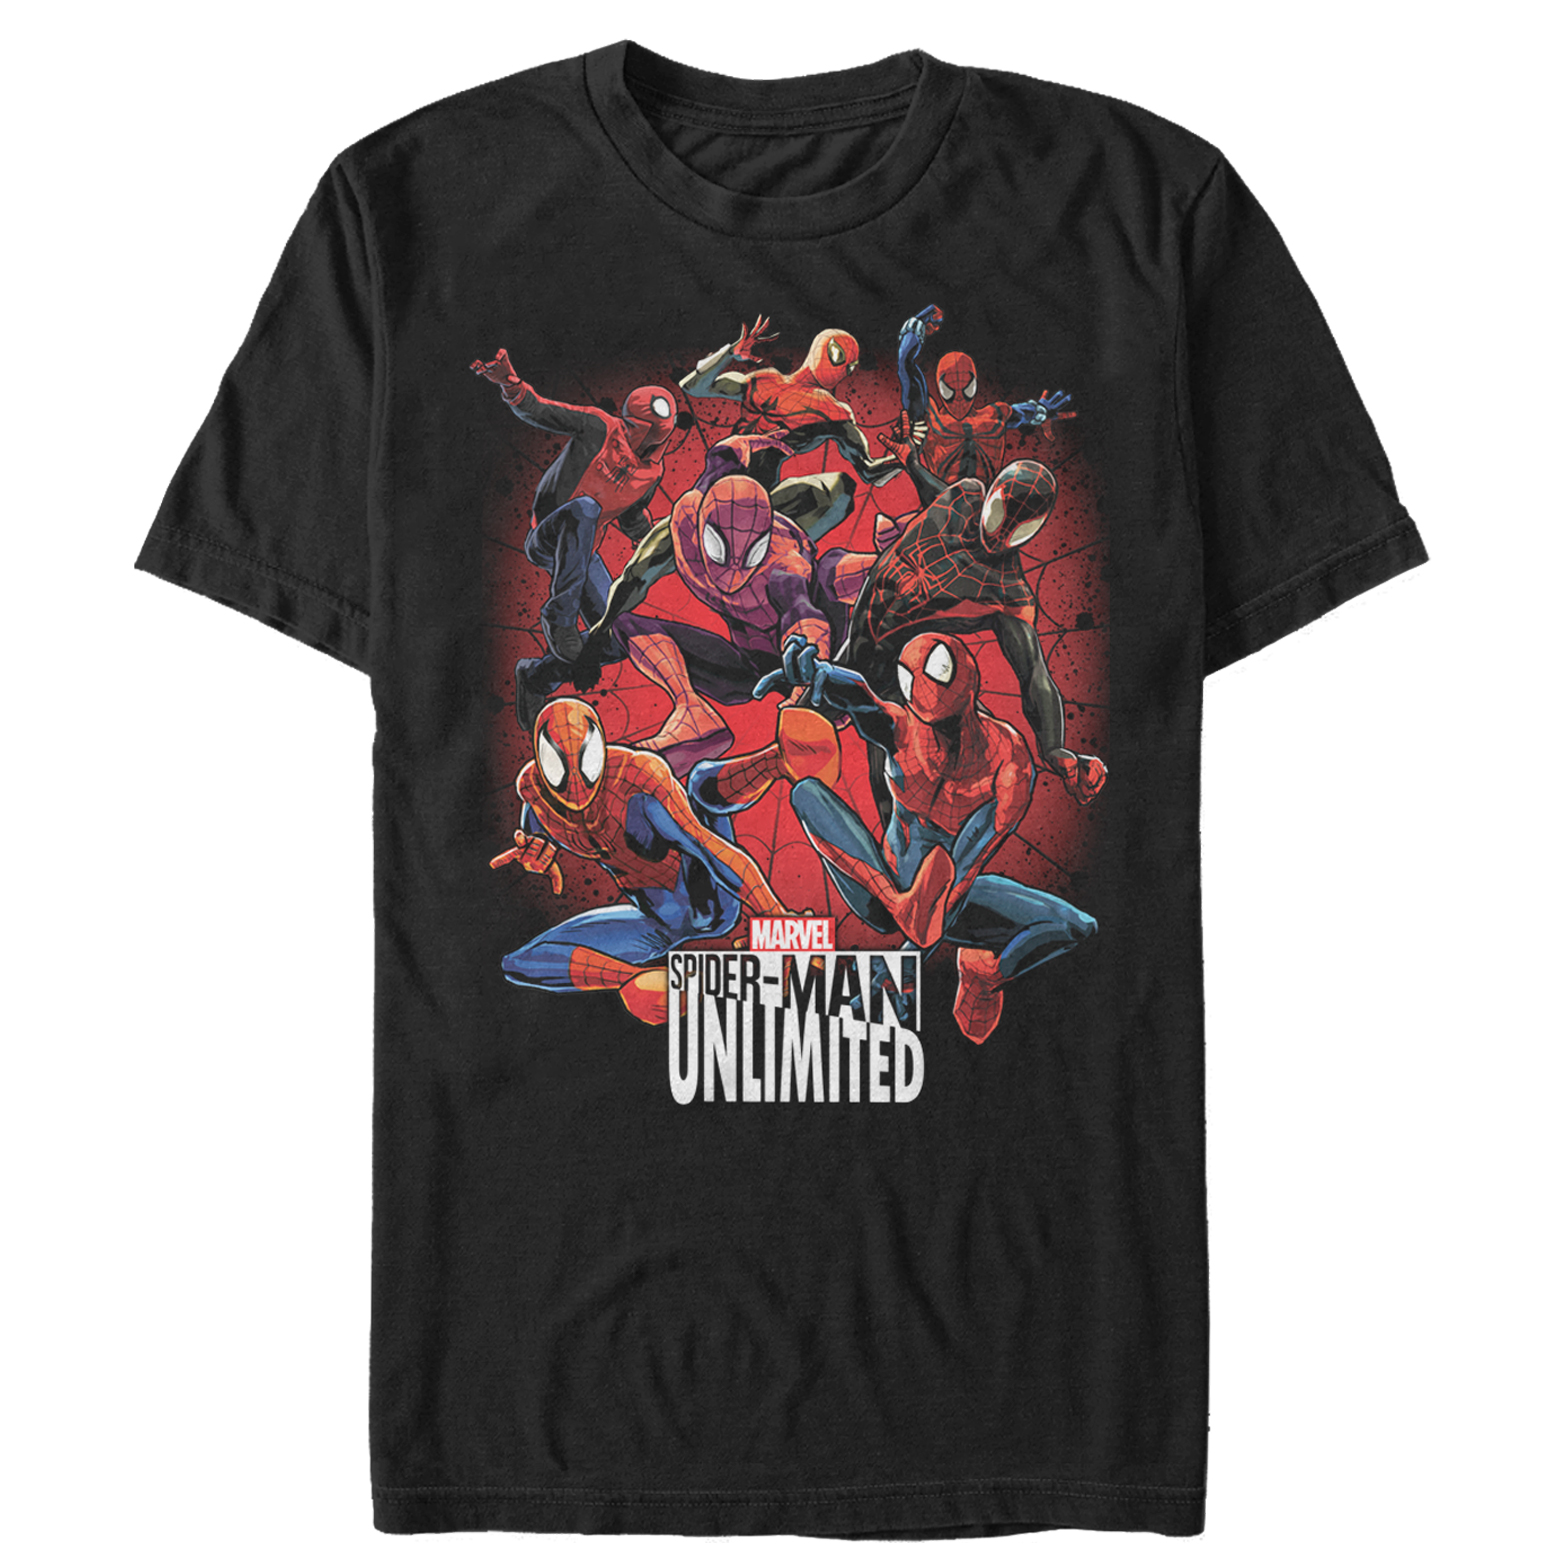 Men's Marvel Spider-Man Unlimited Versions  Graphic Tee Black X Large - image 1 of 4